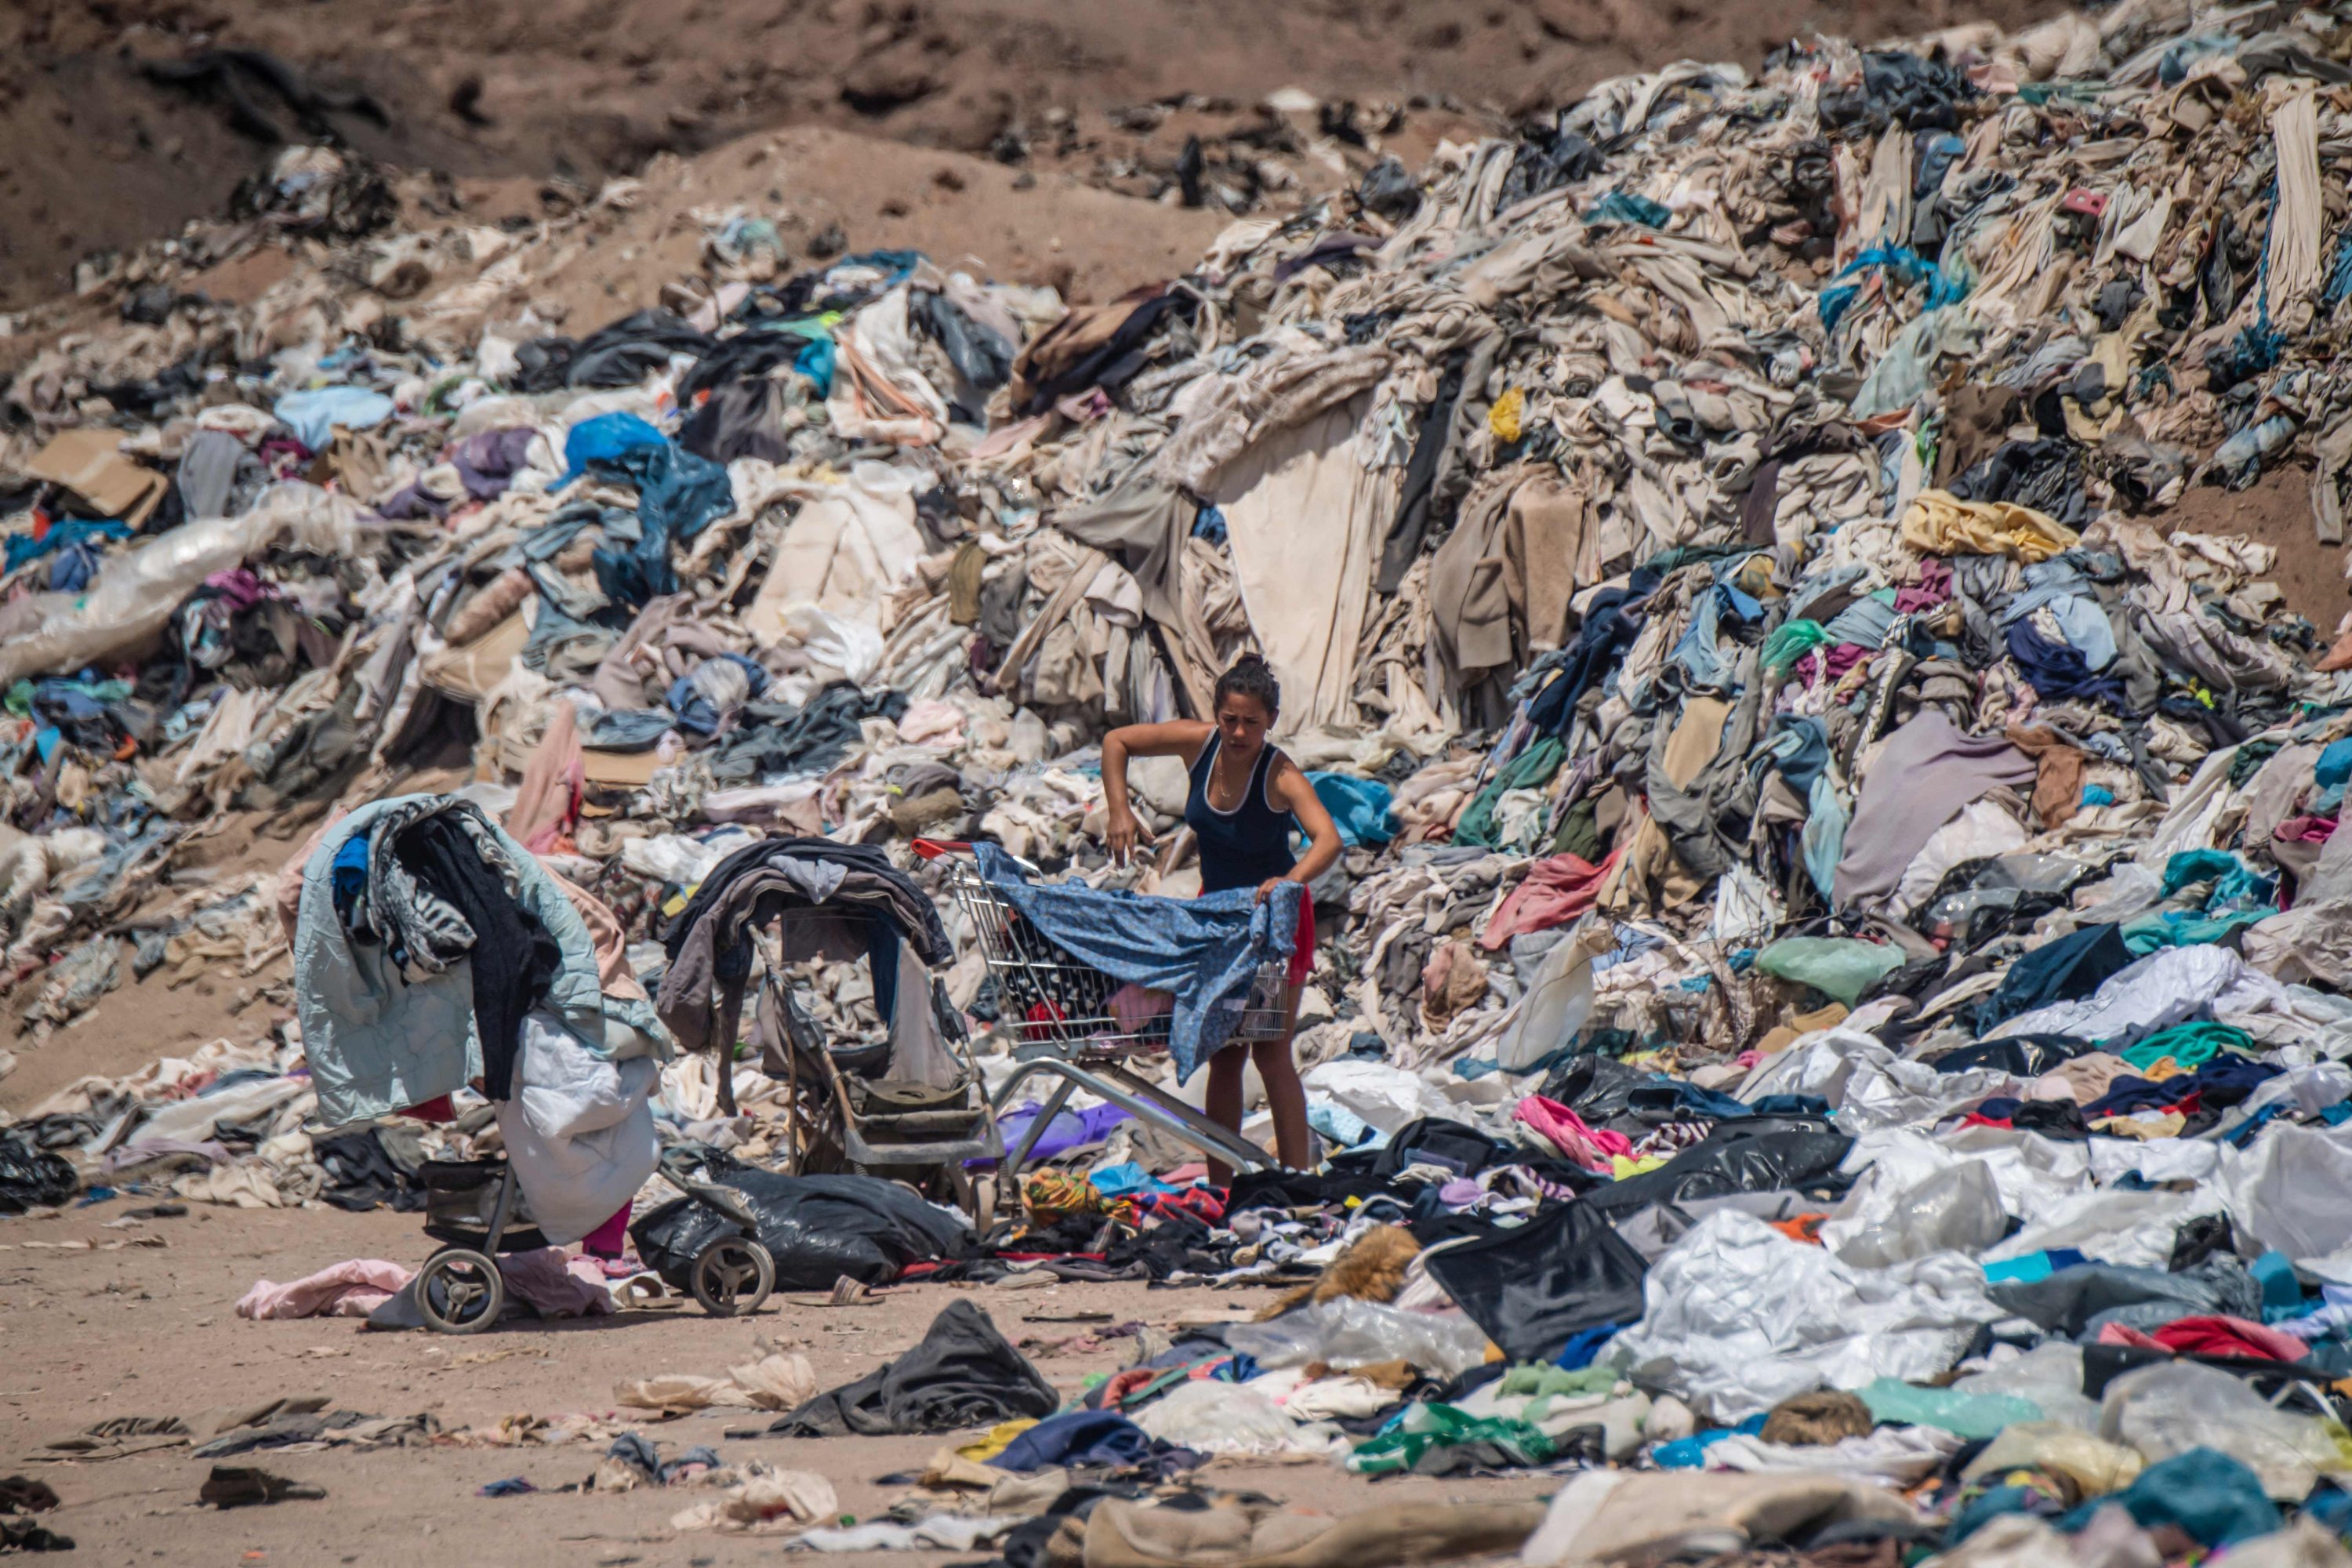 Women search for used clothes amid tons of discarded items in the Atacama desert, in Alto Hospicio, Iquique, Chile, Sept. 26, 2021. (AFP Photo)